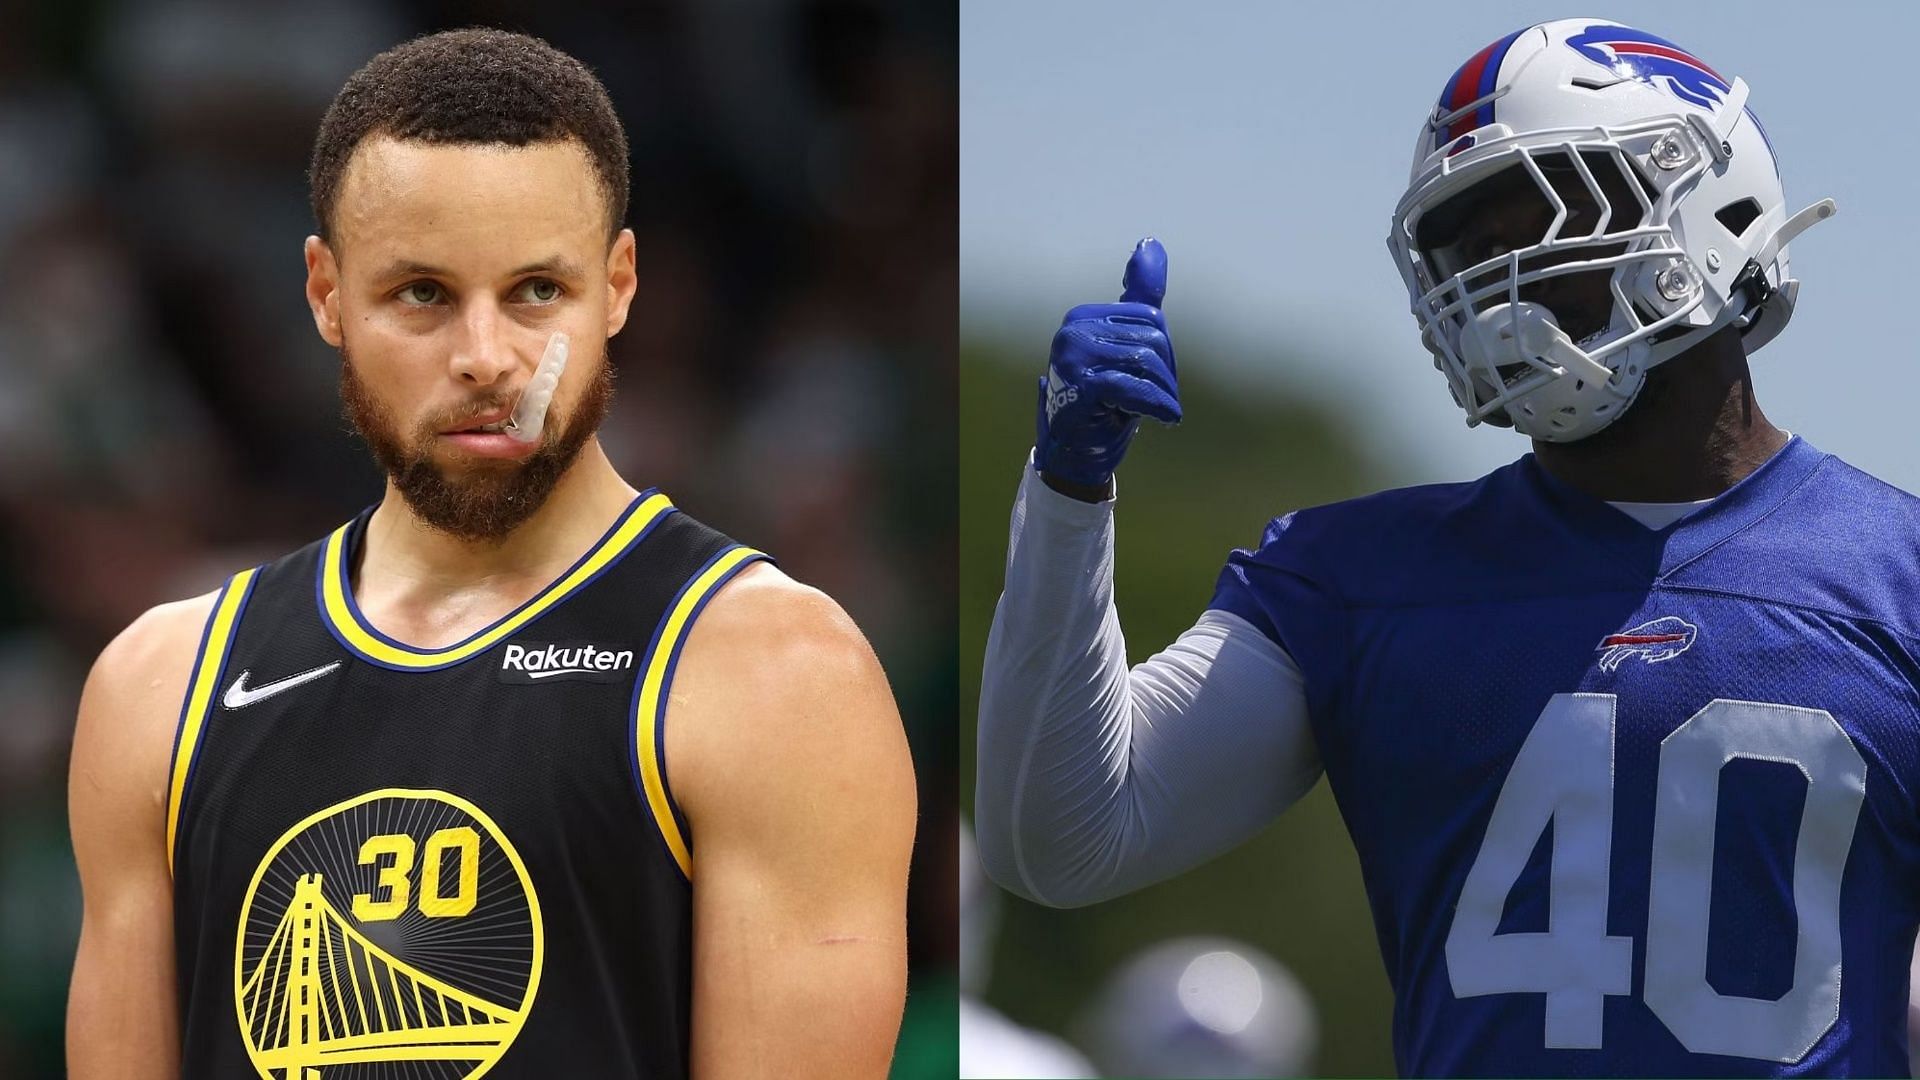 Steph Curry of the Golden State Warriors and Von Miller of the Buffalo Bills.